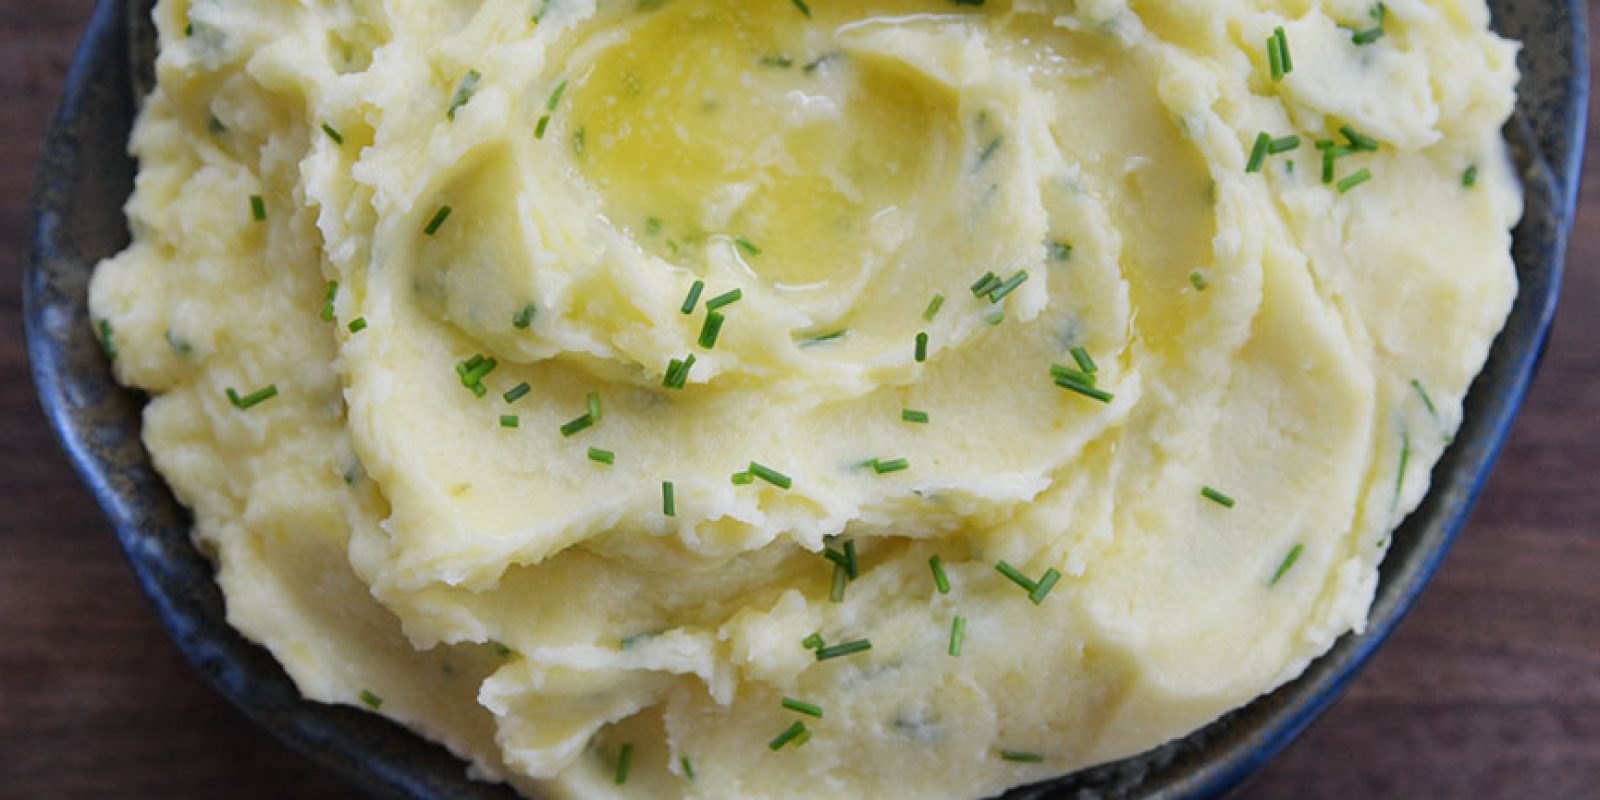 Chive & Crème Fraîche Mashed Potatoes Recipe - Andrew Zimmern